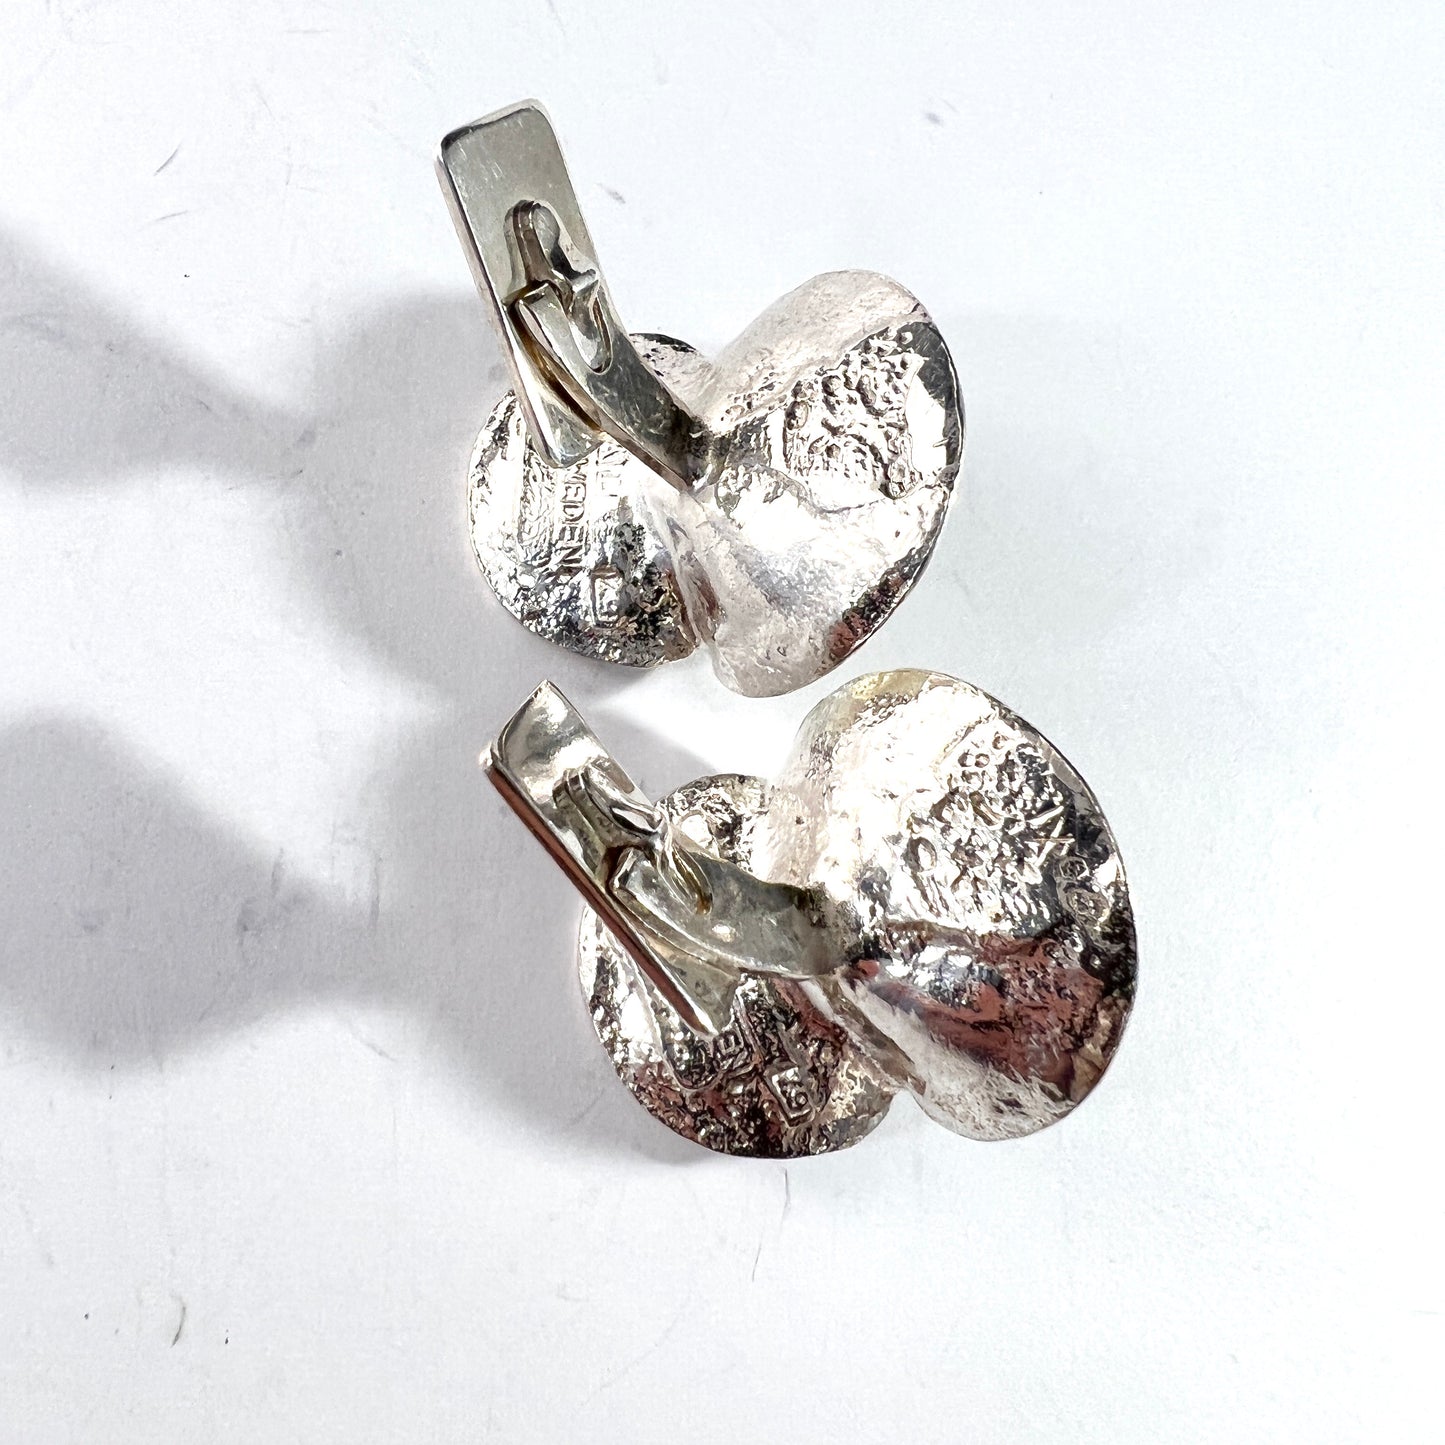 Theresia Hvorslev, Sweden 1974. Very Large Solid Silver Cufflinks. Design Water-Lily